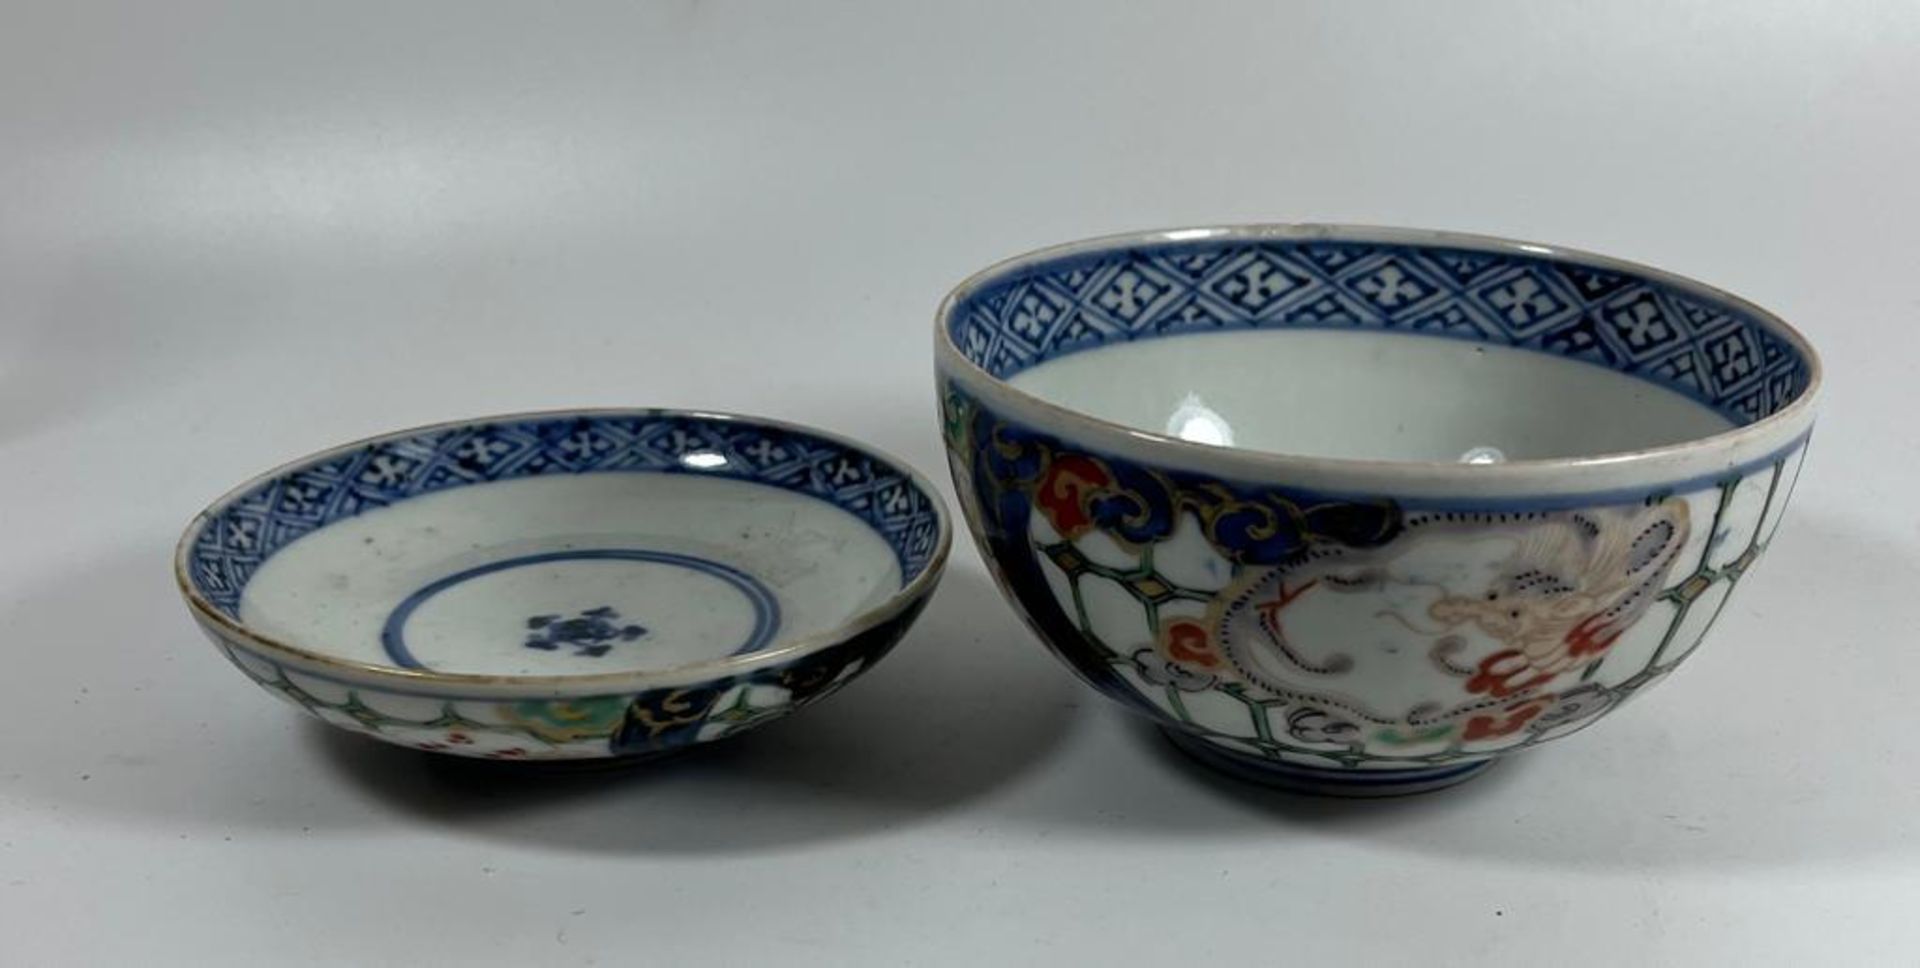 A 19TH CENTURY JAPANESE IMARI DRAGON BOWL AND MATCHING SAUCER, BOTH WITH MATCHING MOTIFS AND DESIGN, - Image 2 of 4